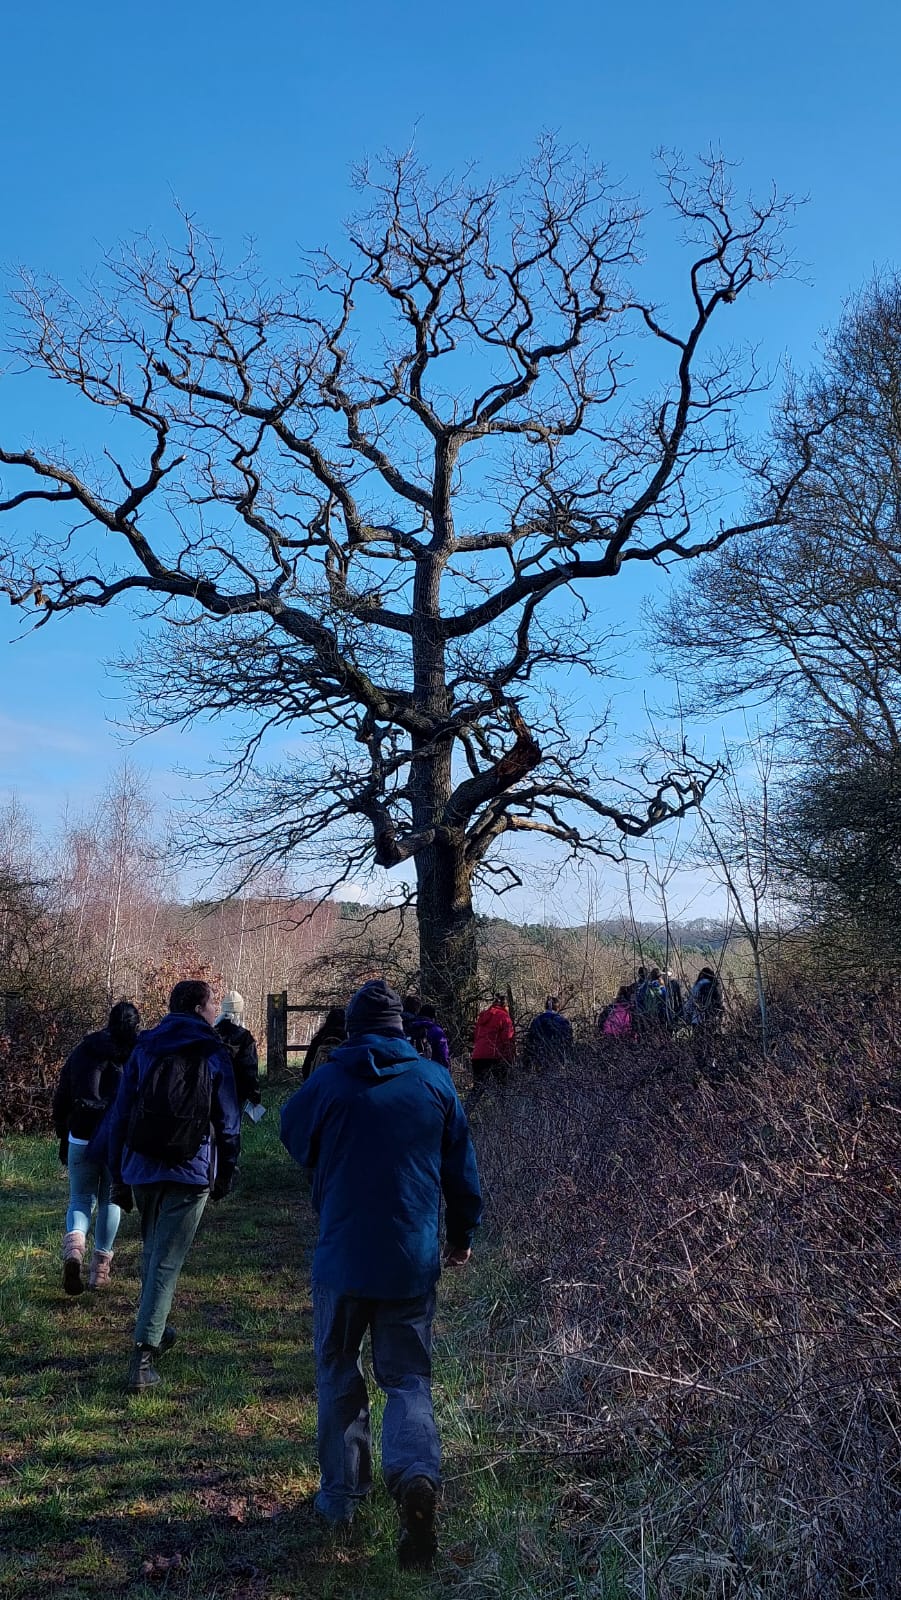 A photograph taken in April of ramblers walking through the forest past a single tree